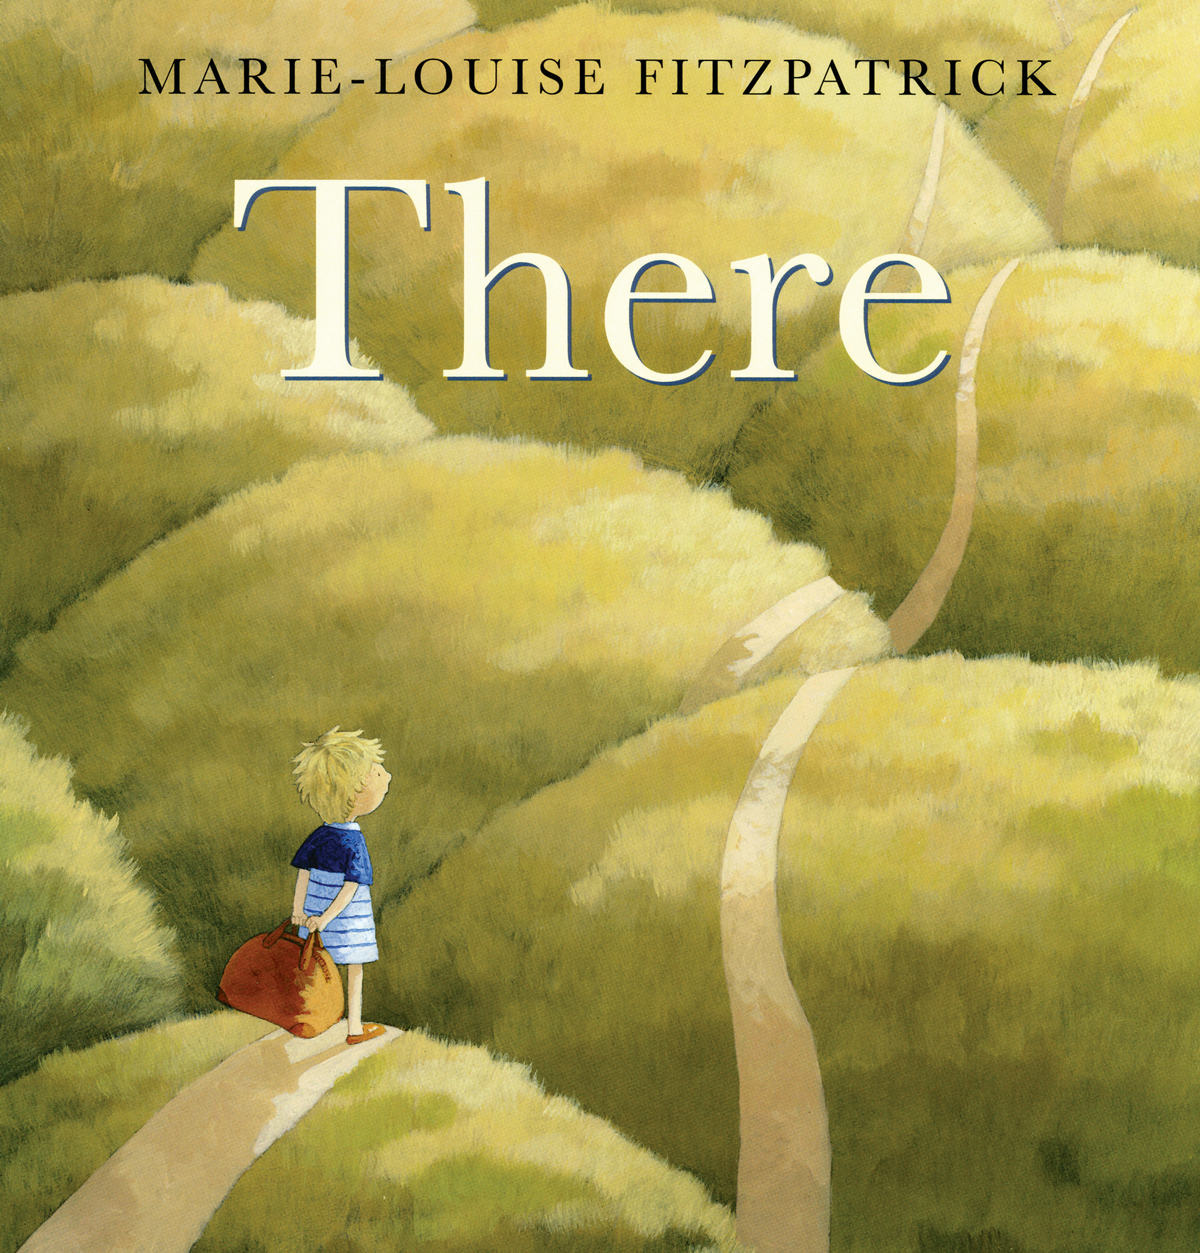 Image result for there by marie louise fitzpatrick